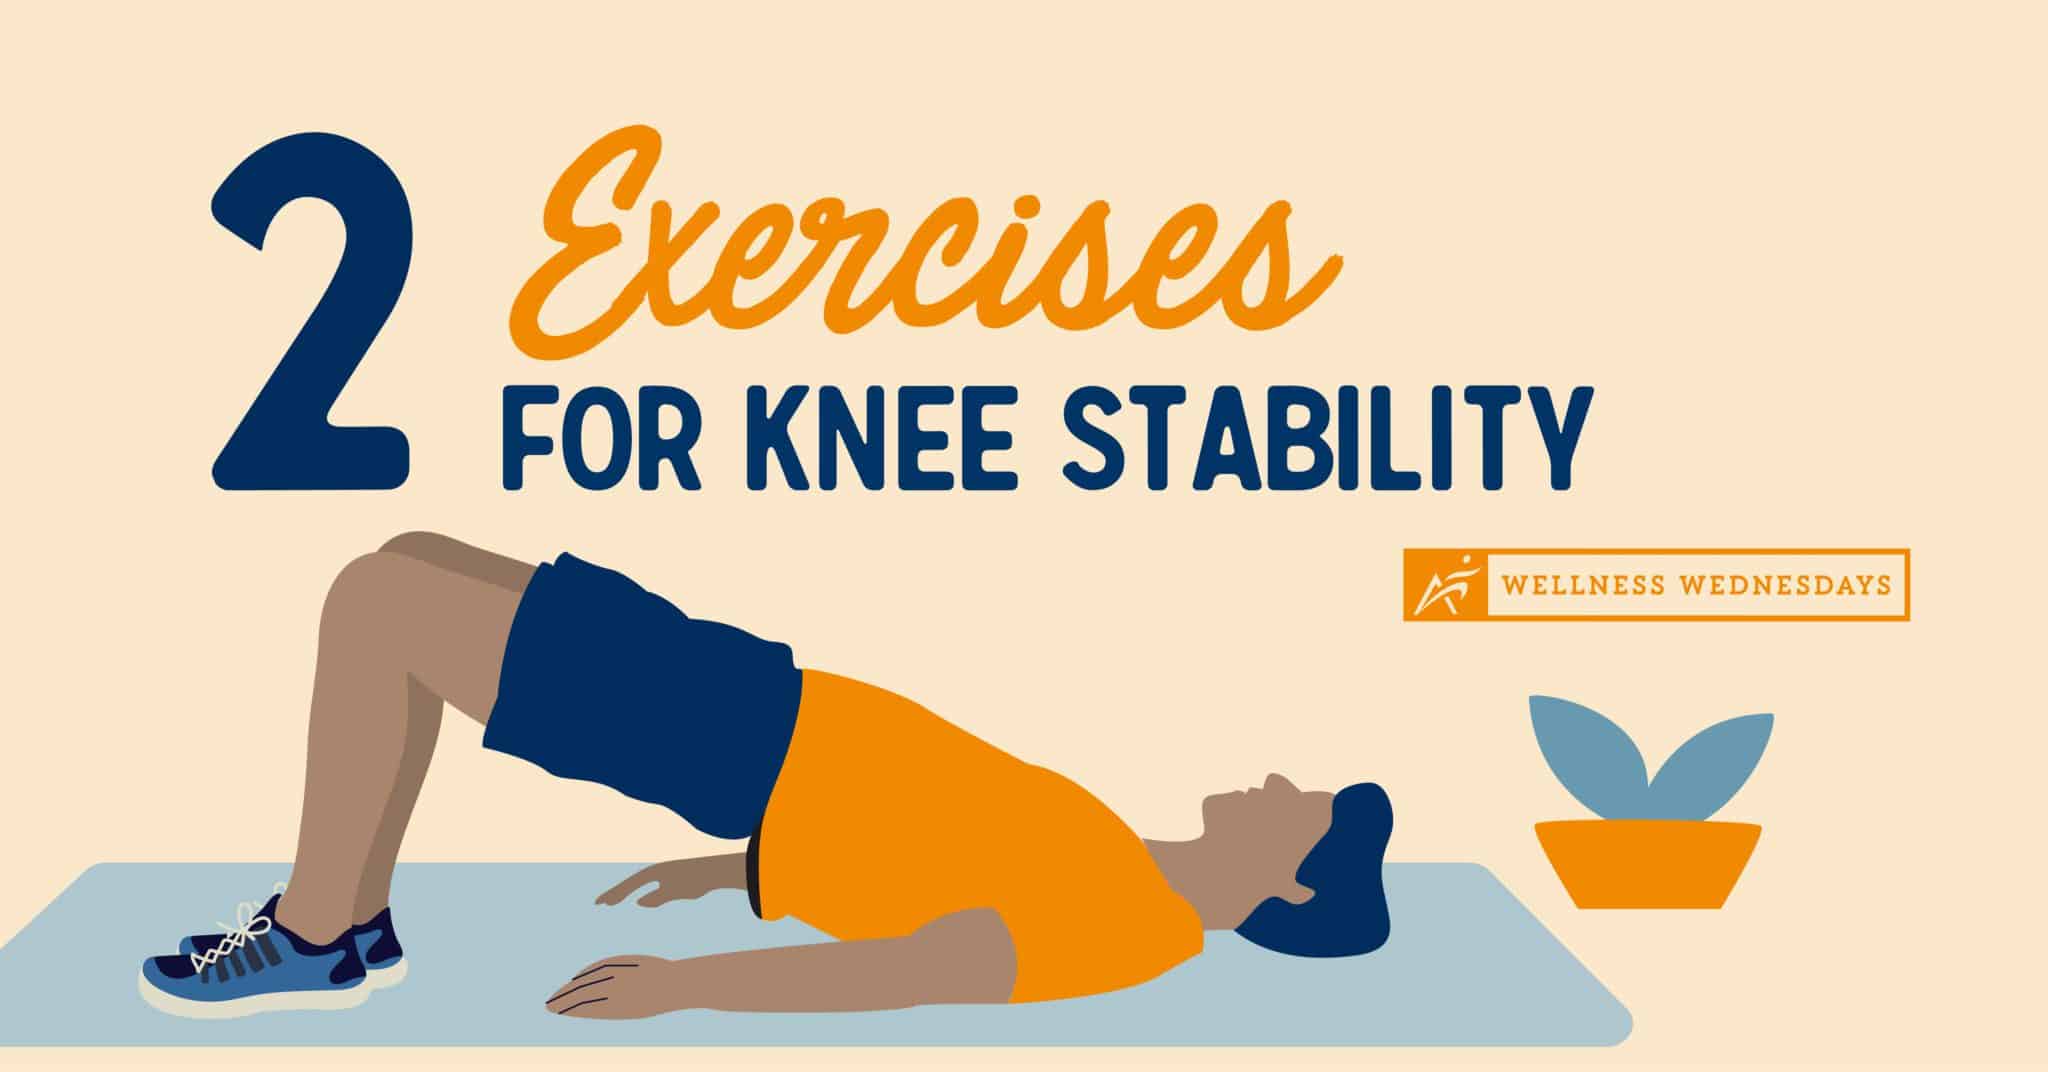 2 Exercises For Knee Stability